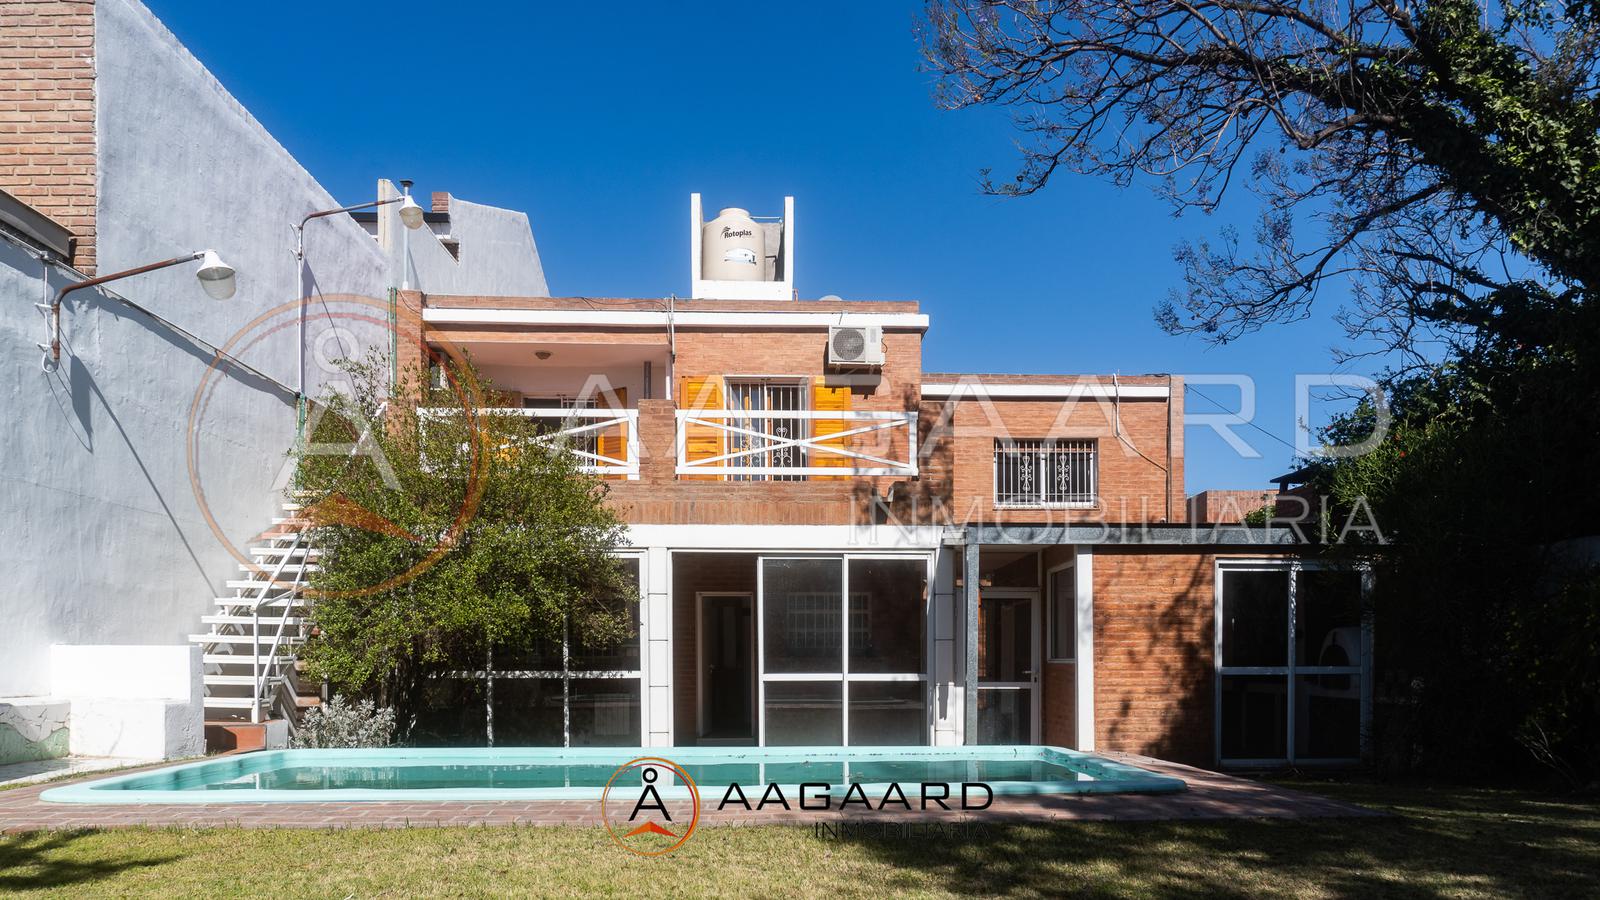 #4443579 | Sale | House | Parque Chacabuco (AAGAARD INMOBILIARIA)